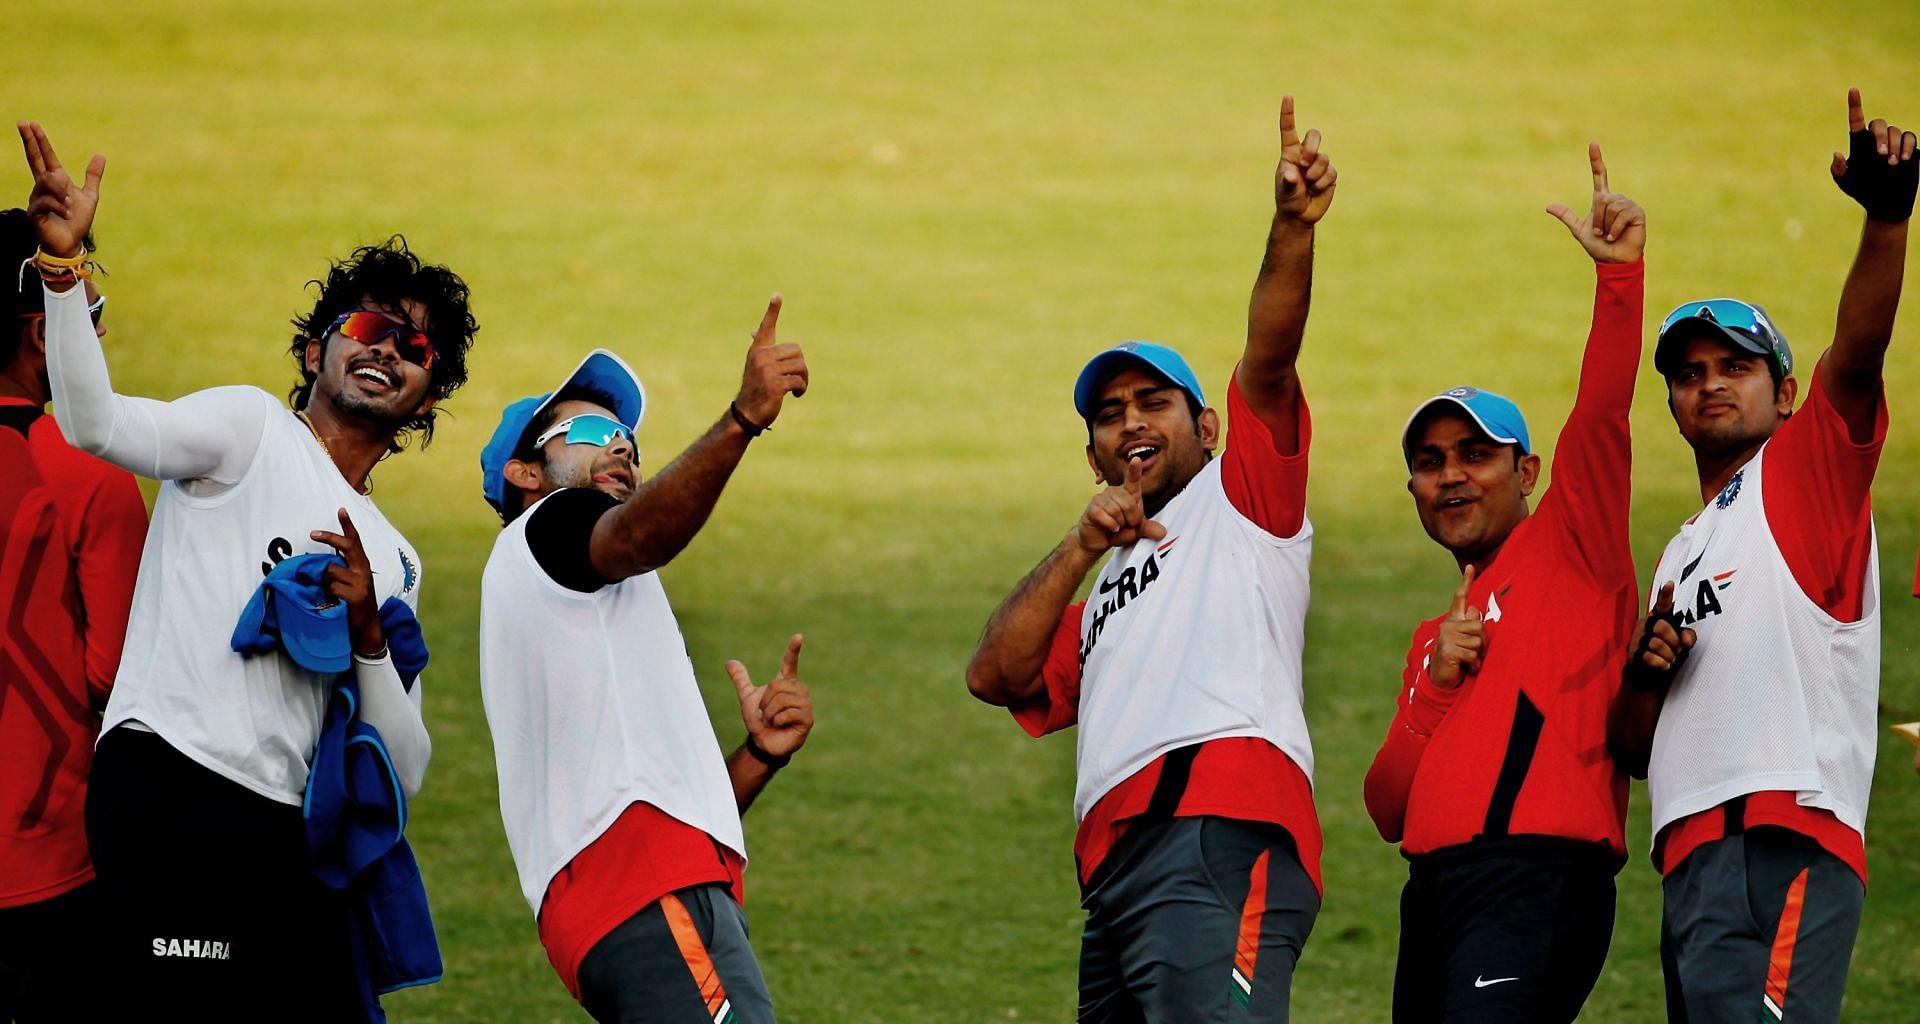 Indian players during a 2011 World Cup training session. (Pic: Getty Images)